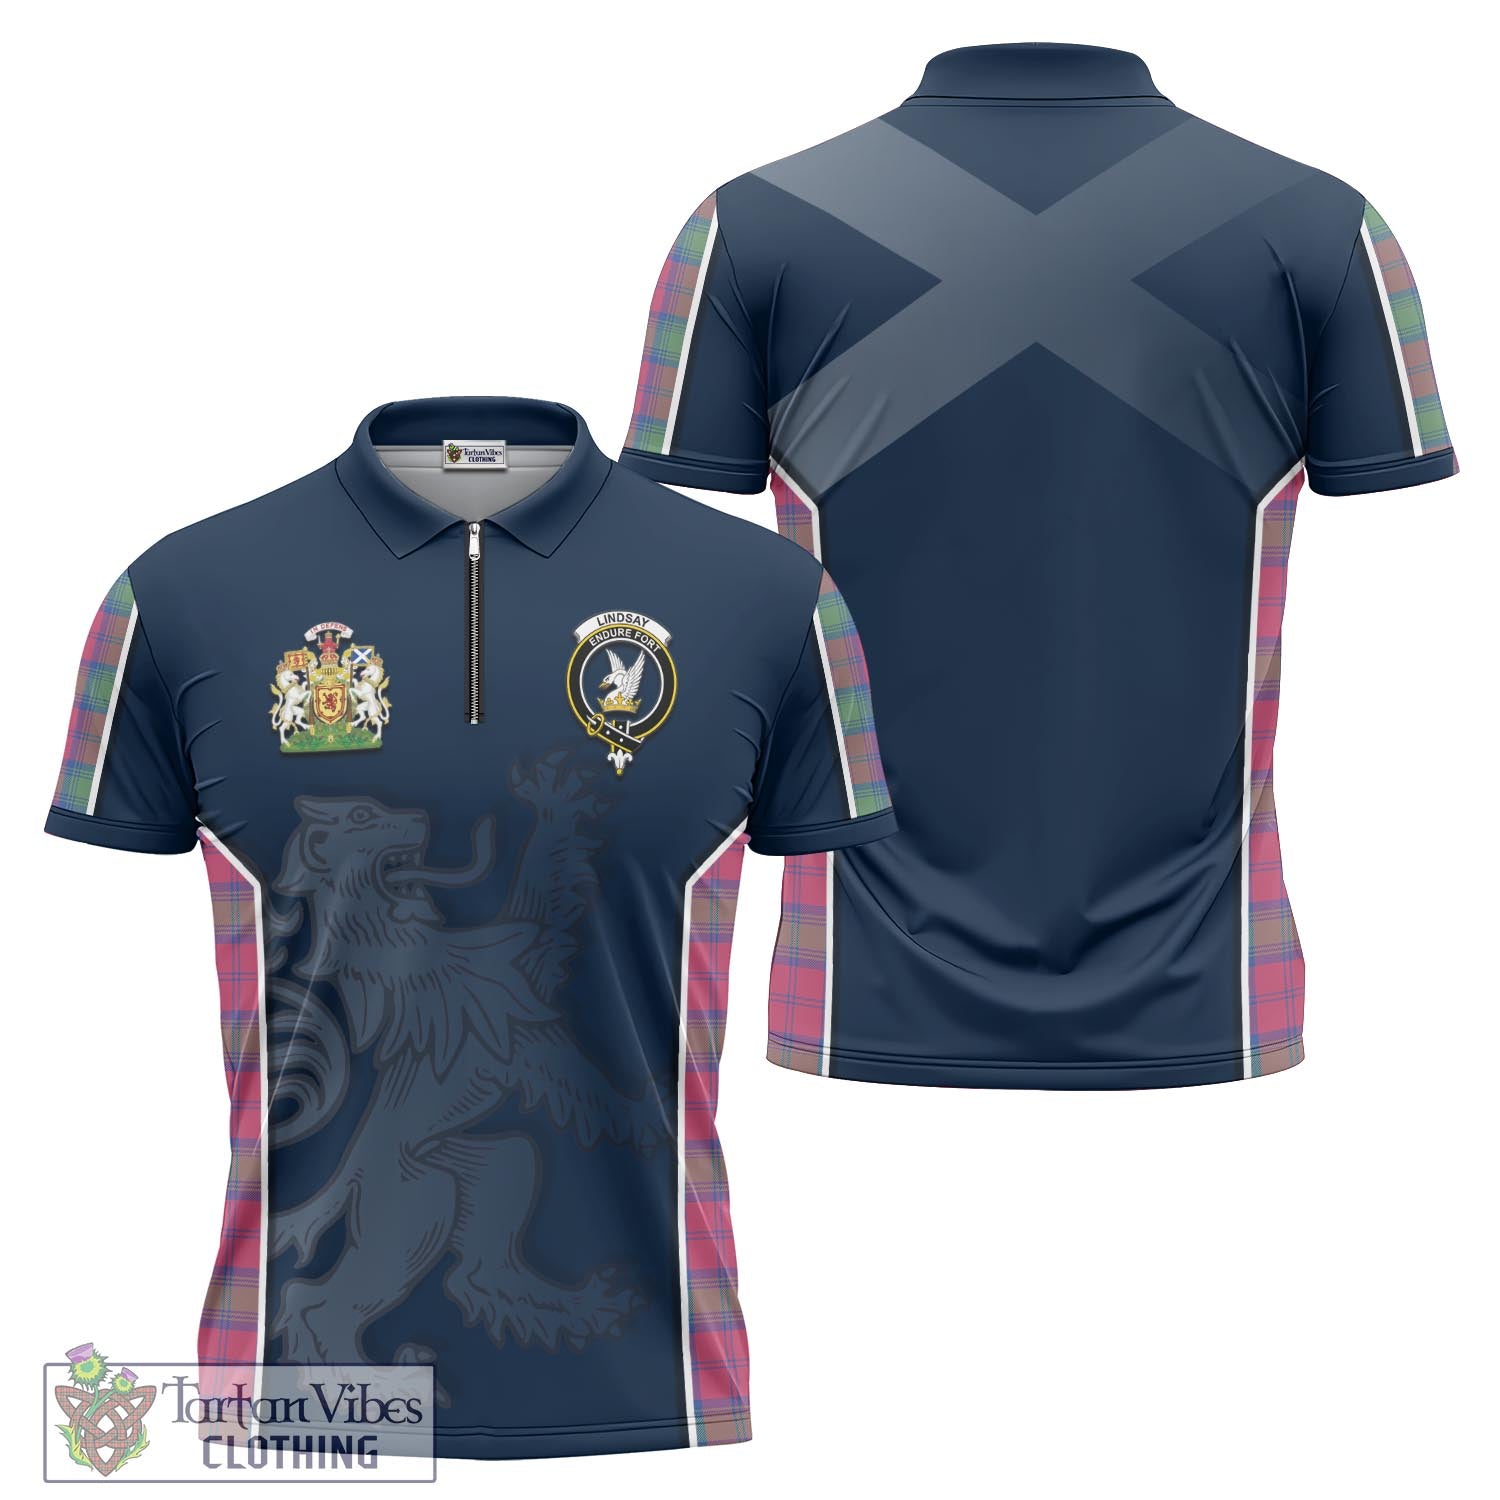 Tartan Vibes Clothing Lindsay Ancient Tartan Zipper Polo Shirt with Family Crest and Lion Rampant Vibes Sport Style